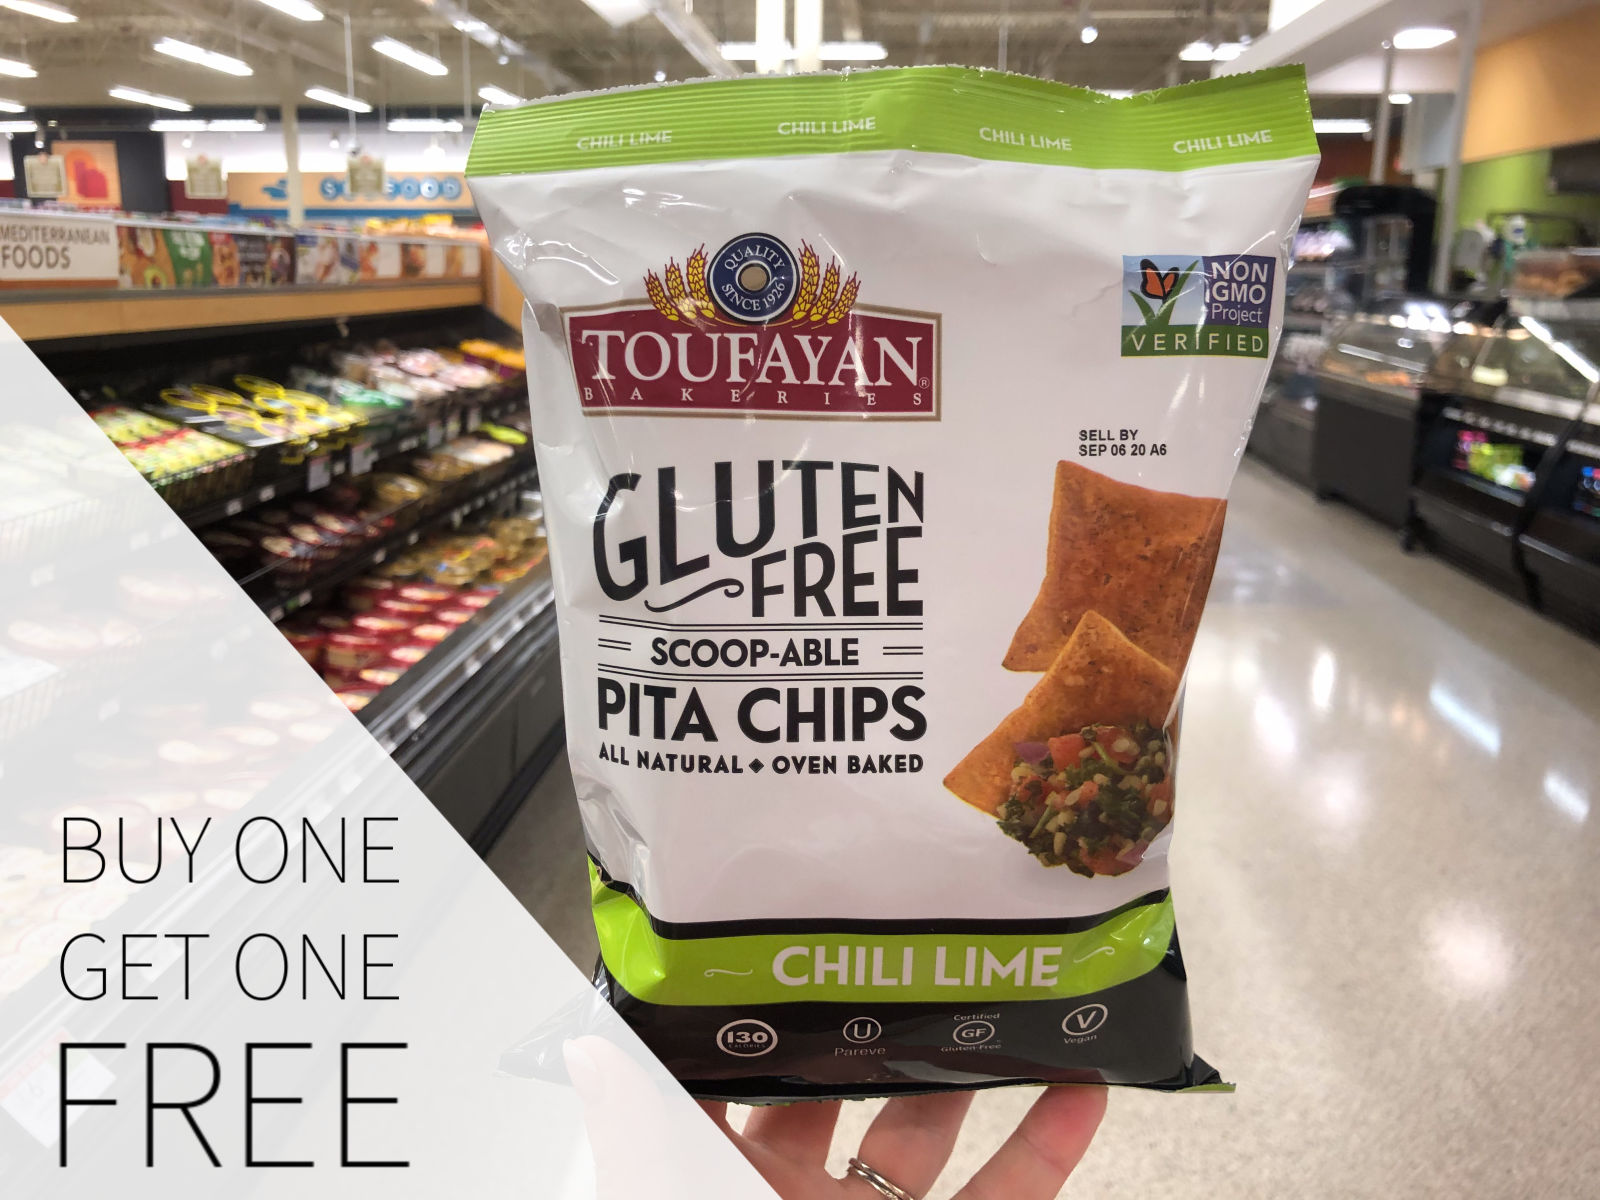 Delicious Toufayan Gluten-Free Scoop-Able Pita Chips Are BOGO This Week At Publix